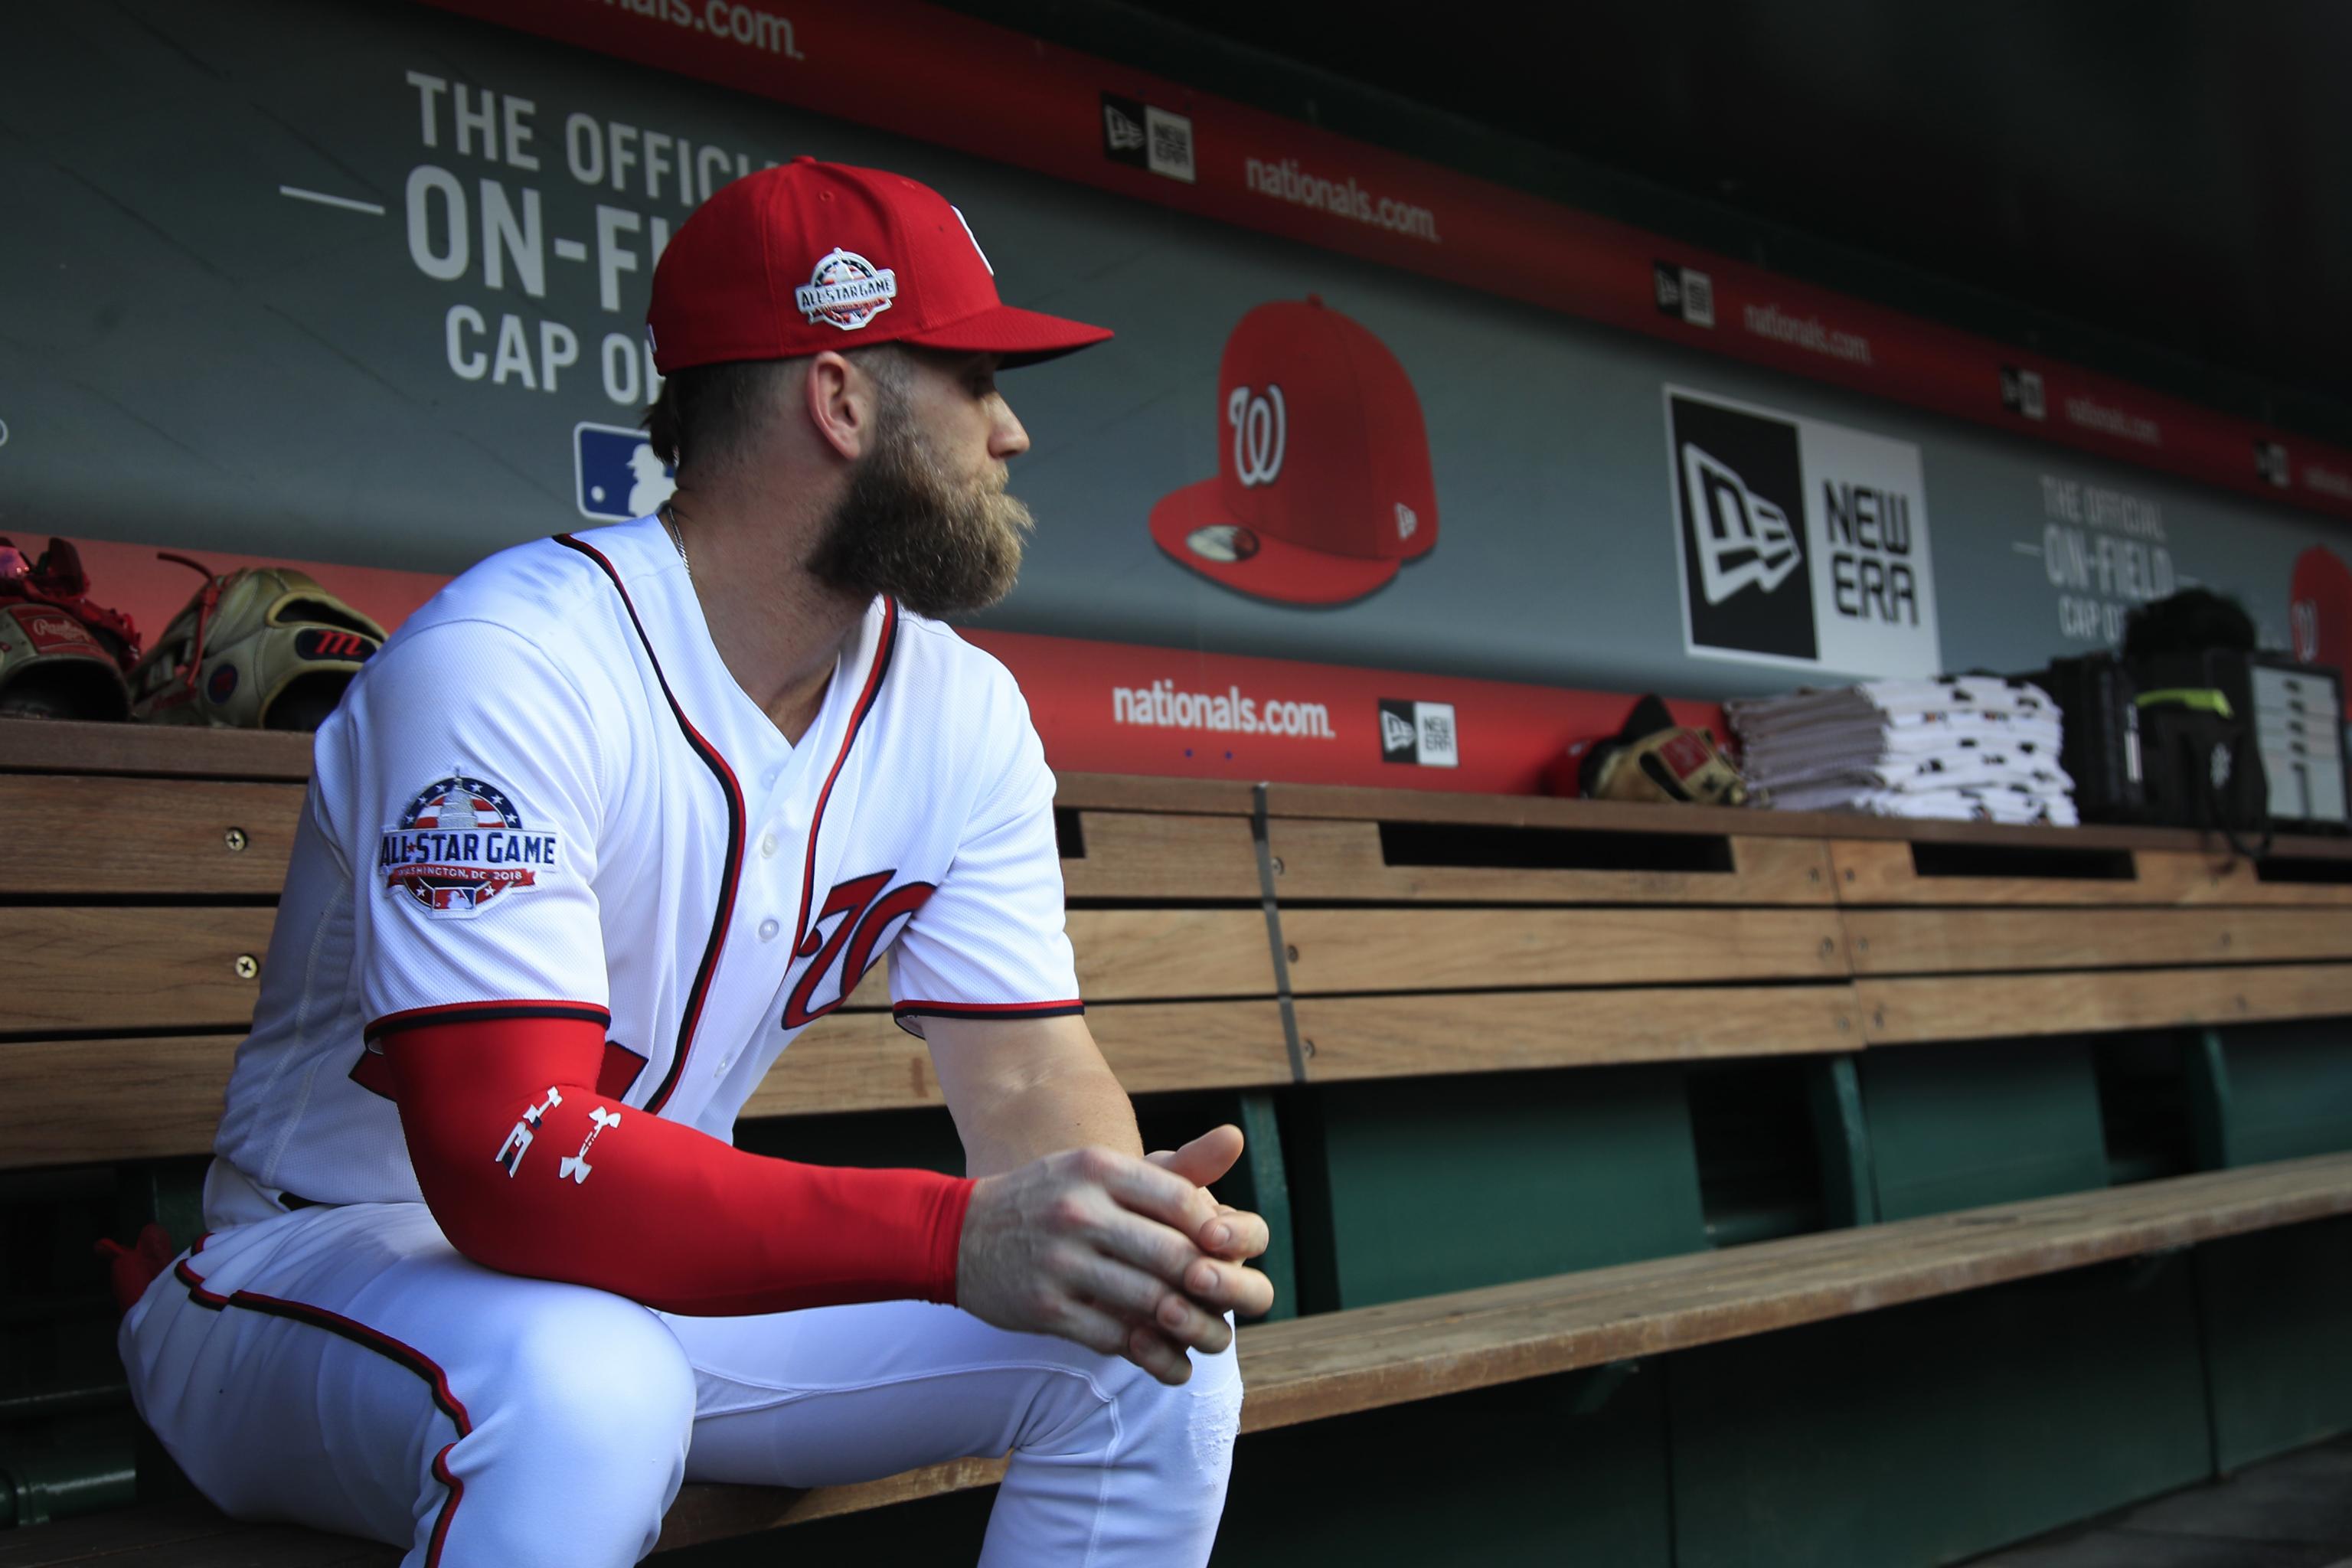 Bryce Harper wants a new jersey for the Washington Nationals